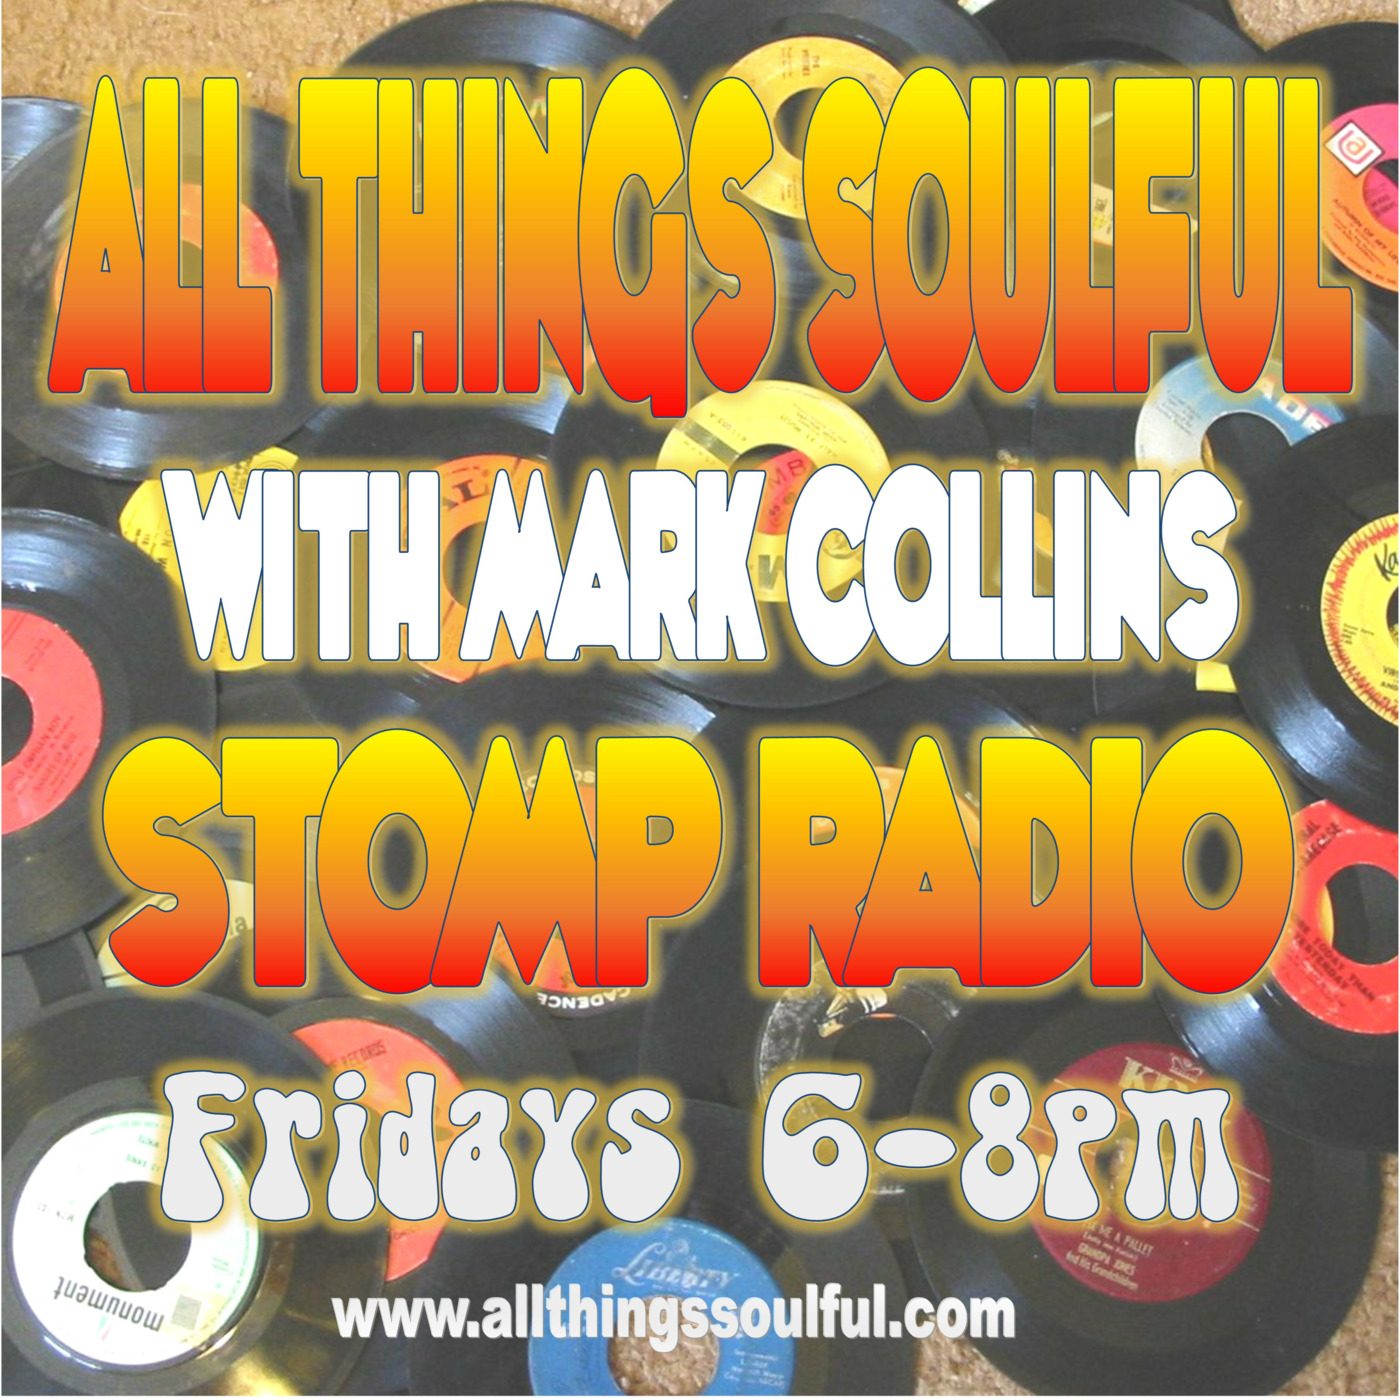 Mark Collins - All Things Soulful